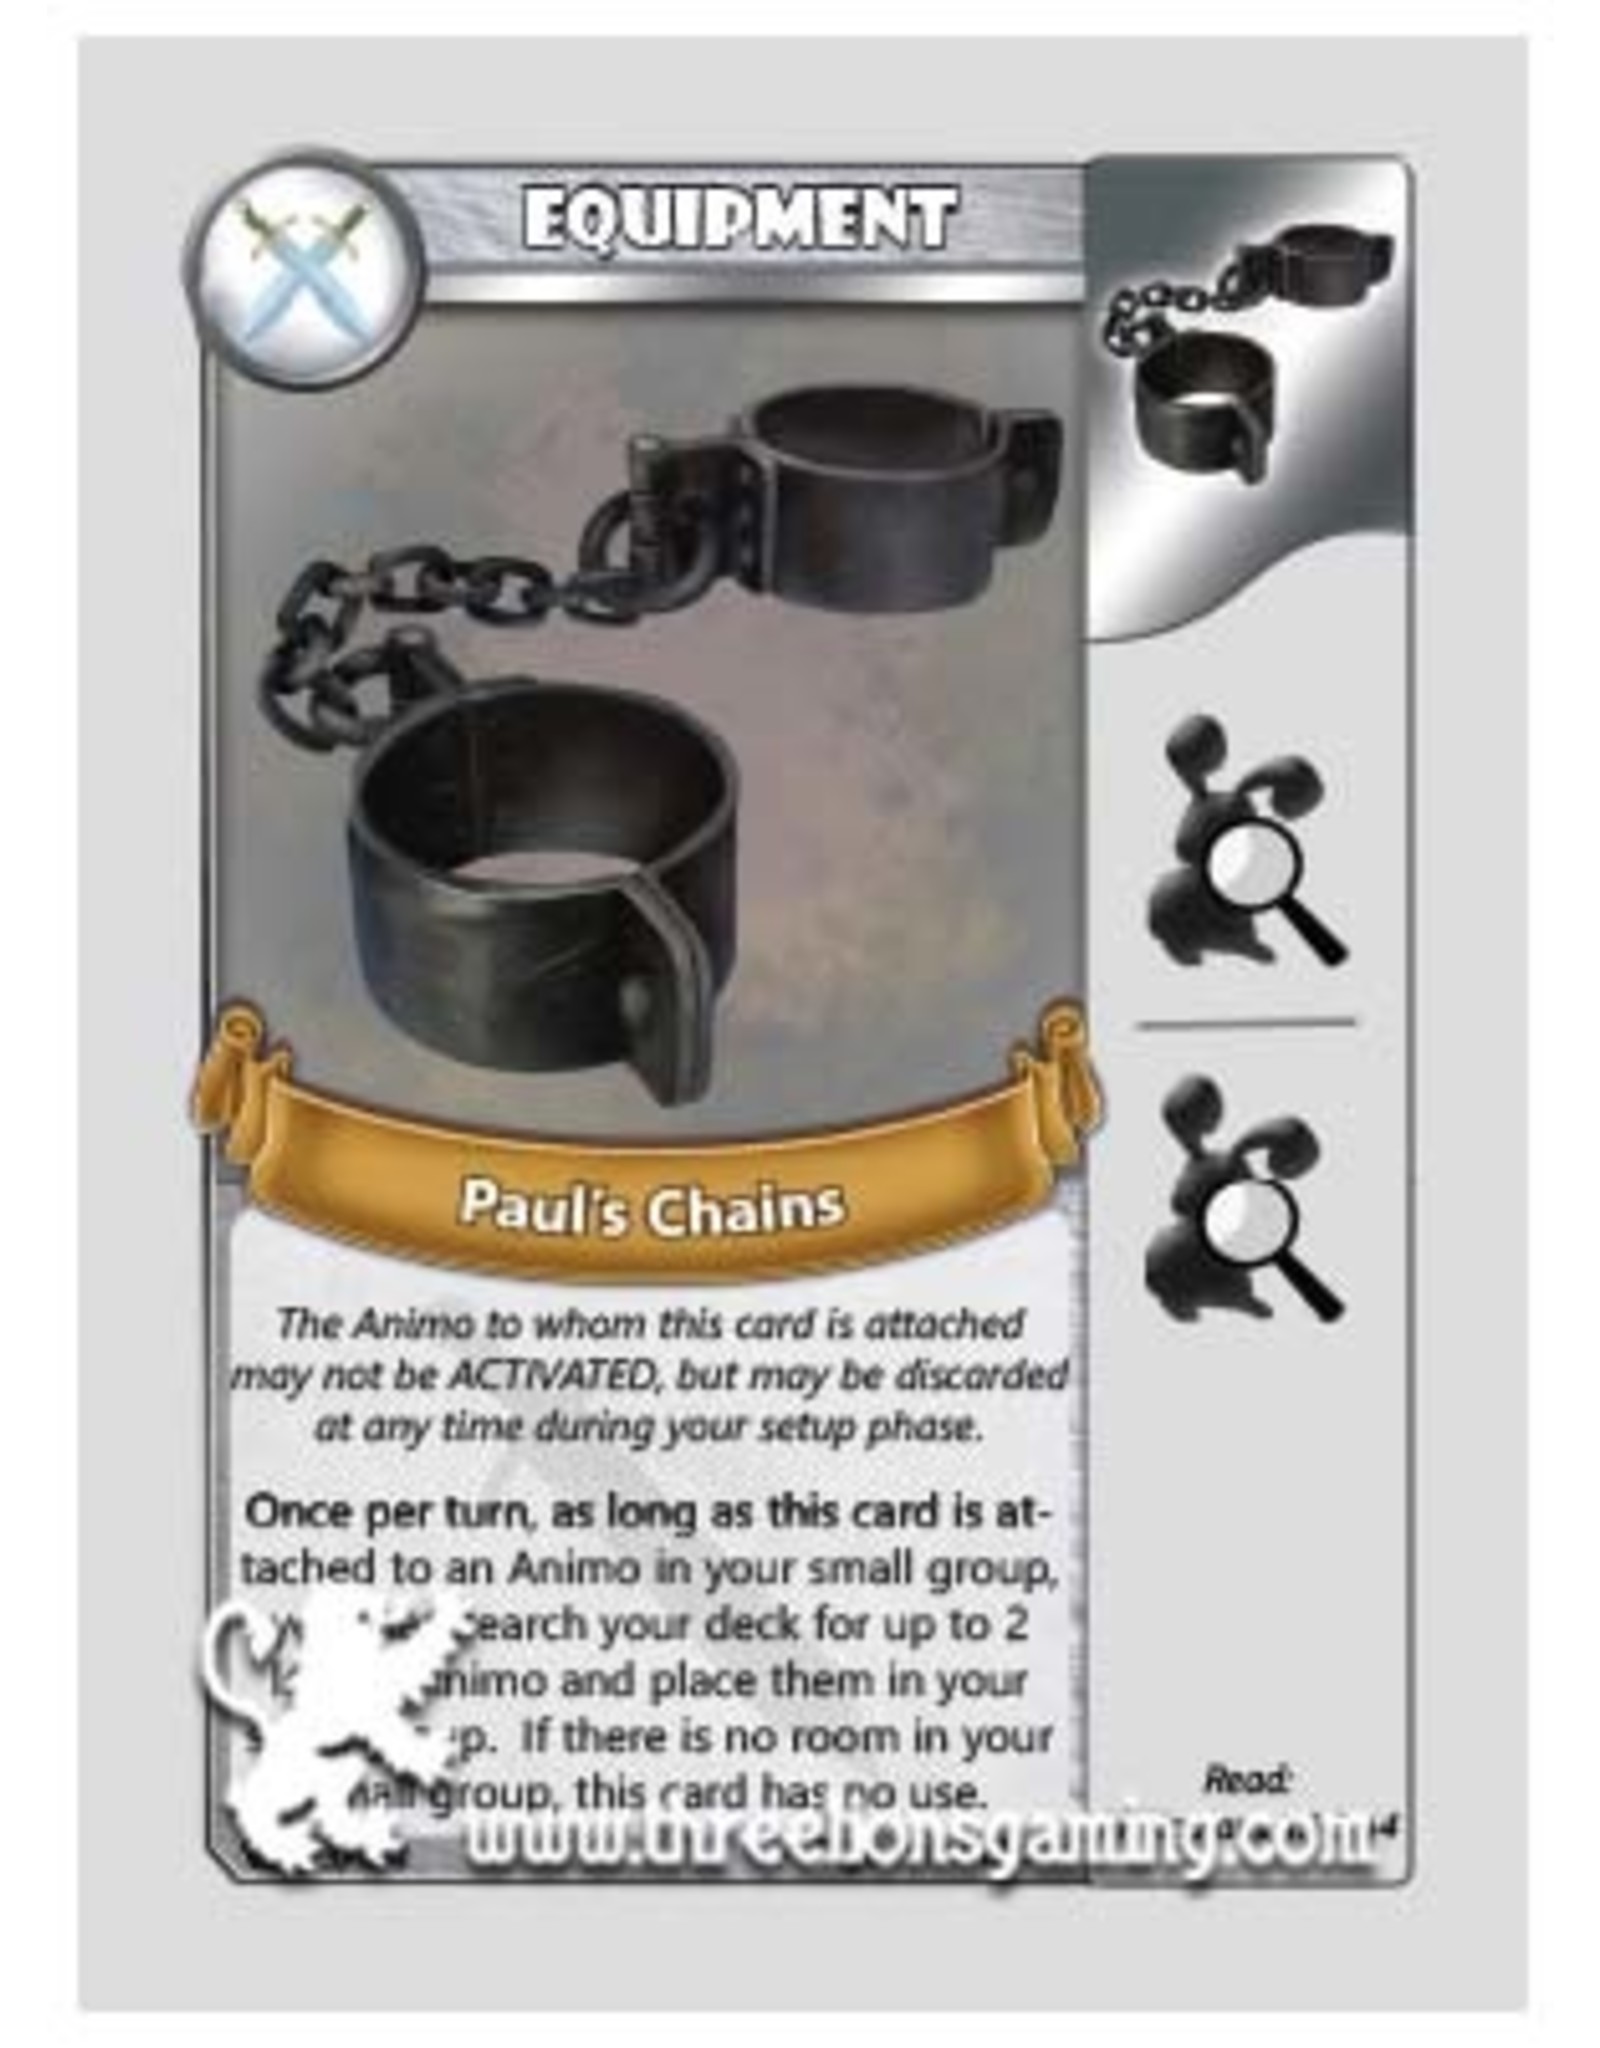 CT: Paul's Chains